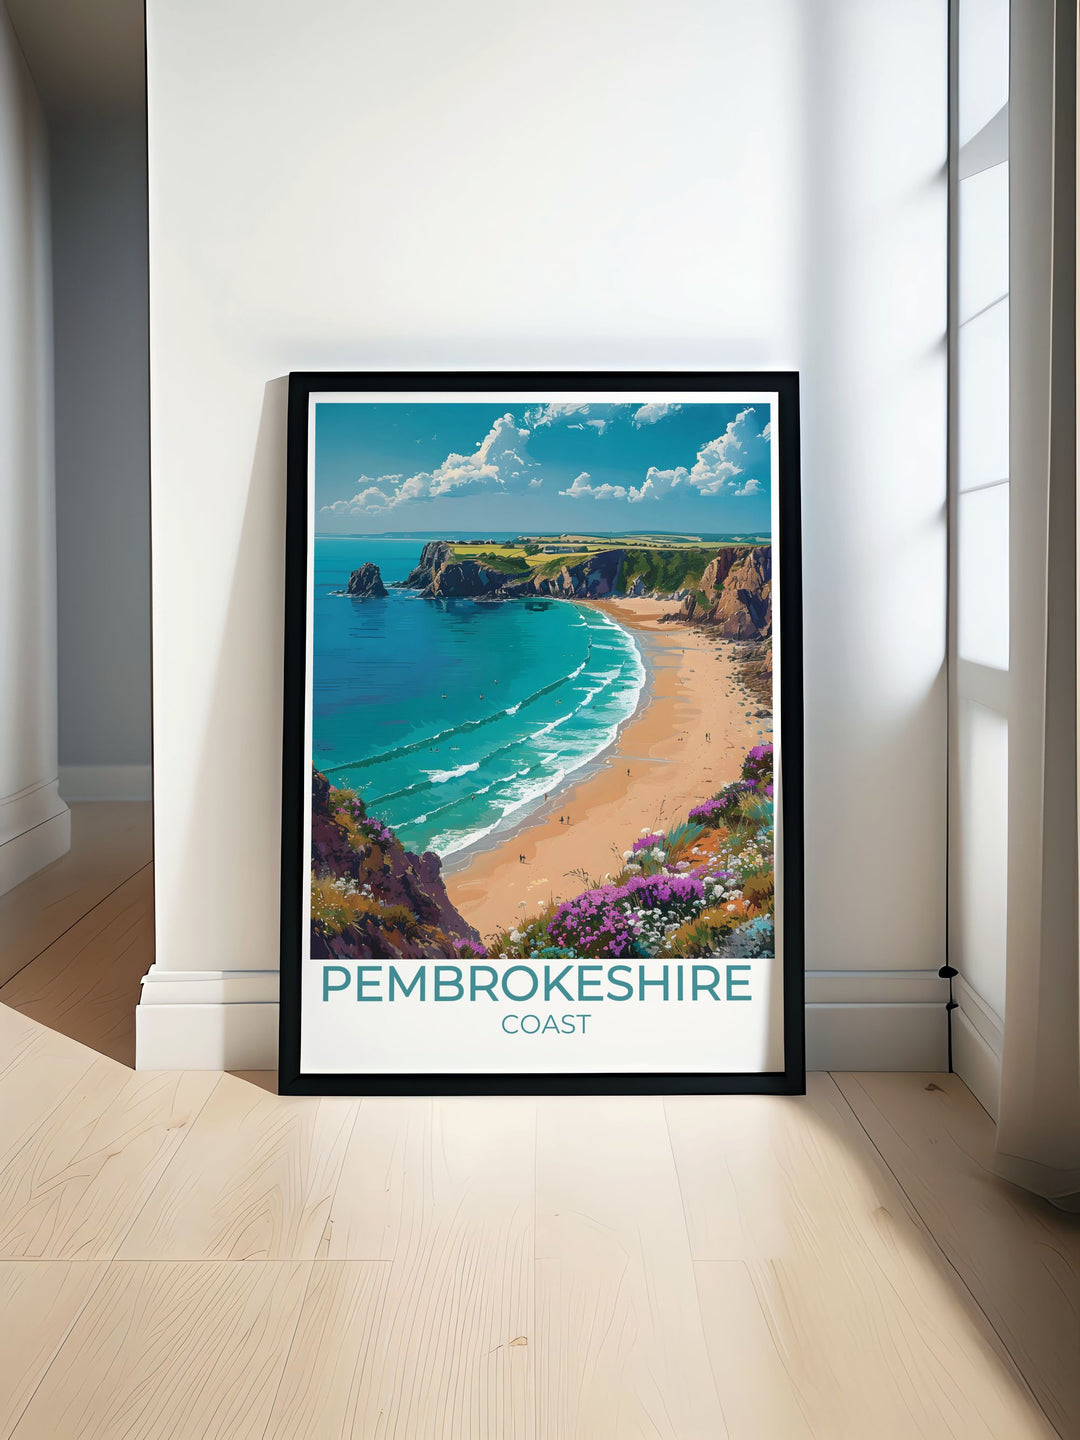 Barafundle Bay travel poster featuring the stunning Pembrokeshire Coast with vibrant colors and intricate details perfect for adding a touch of Welsh beauty to your home decor or as a unique gift for nature and travel enthusiasts who love the coast.